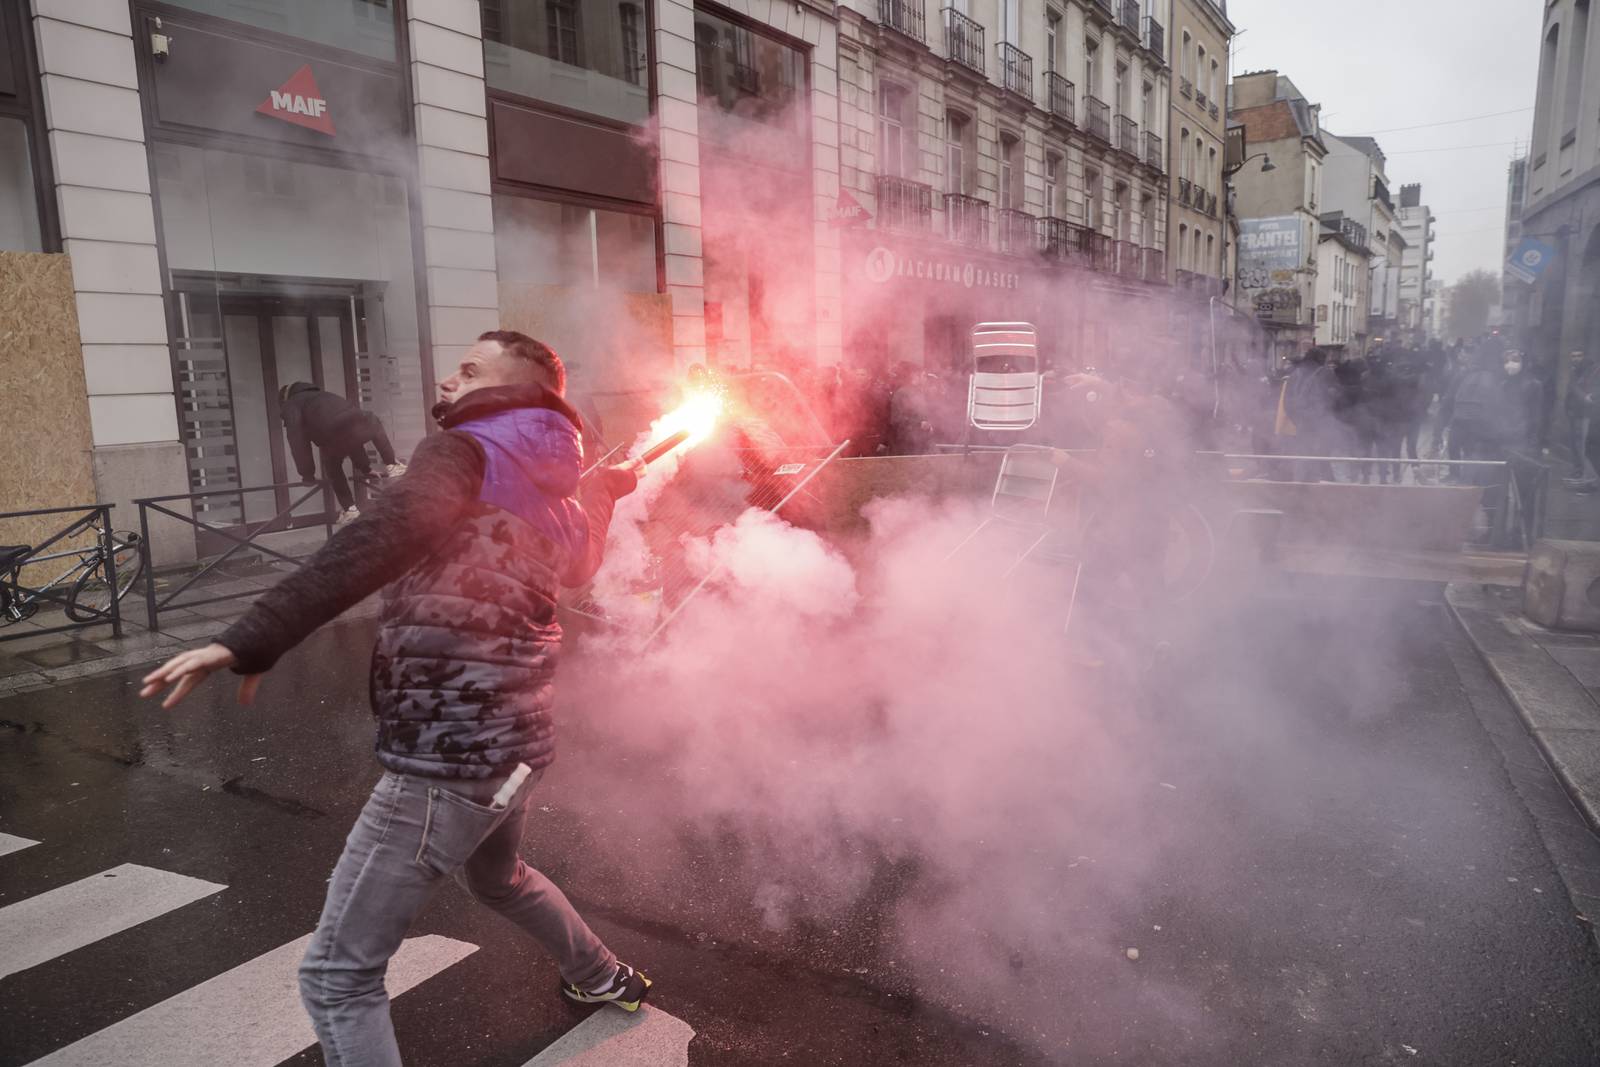 A man throws a flare towards riot police in Rennes, as protests continue across France over pension reforms and the rising cost of living. AP